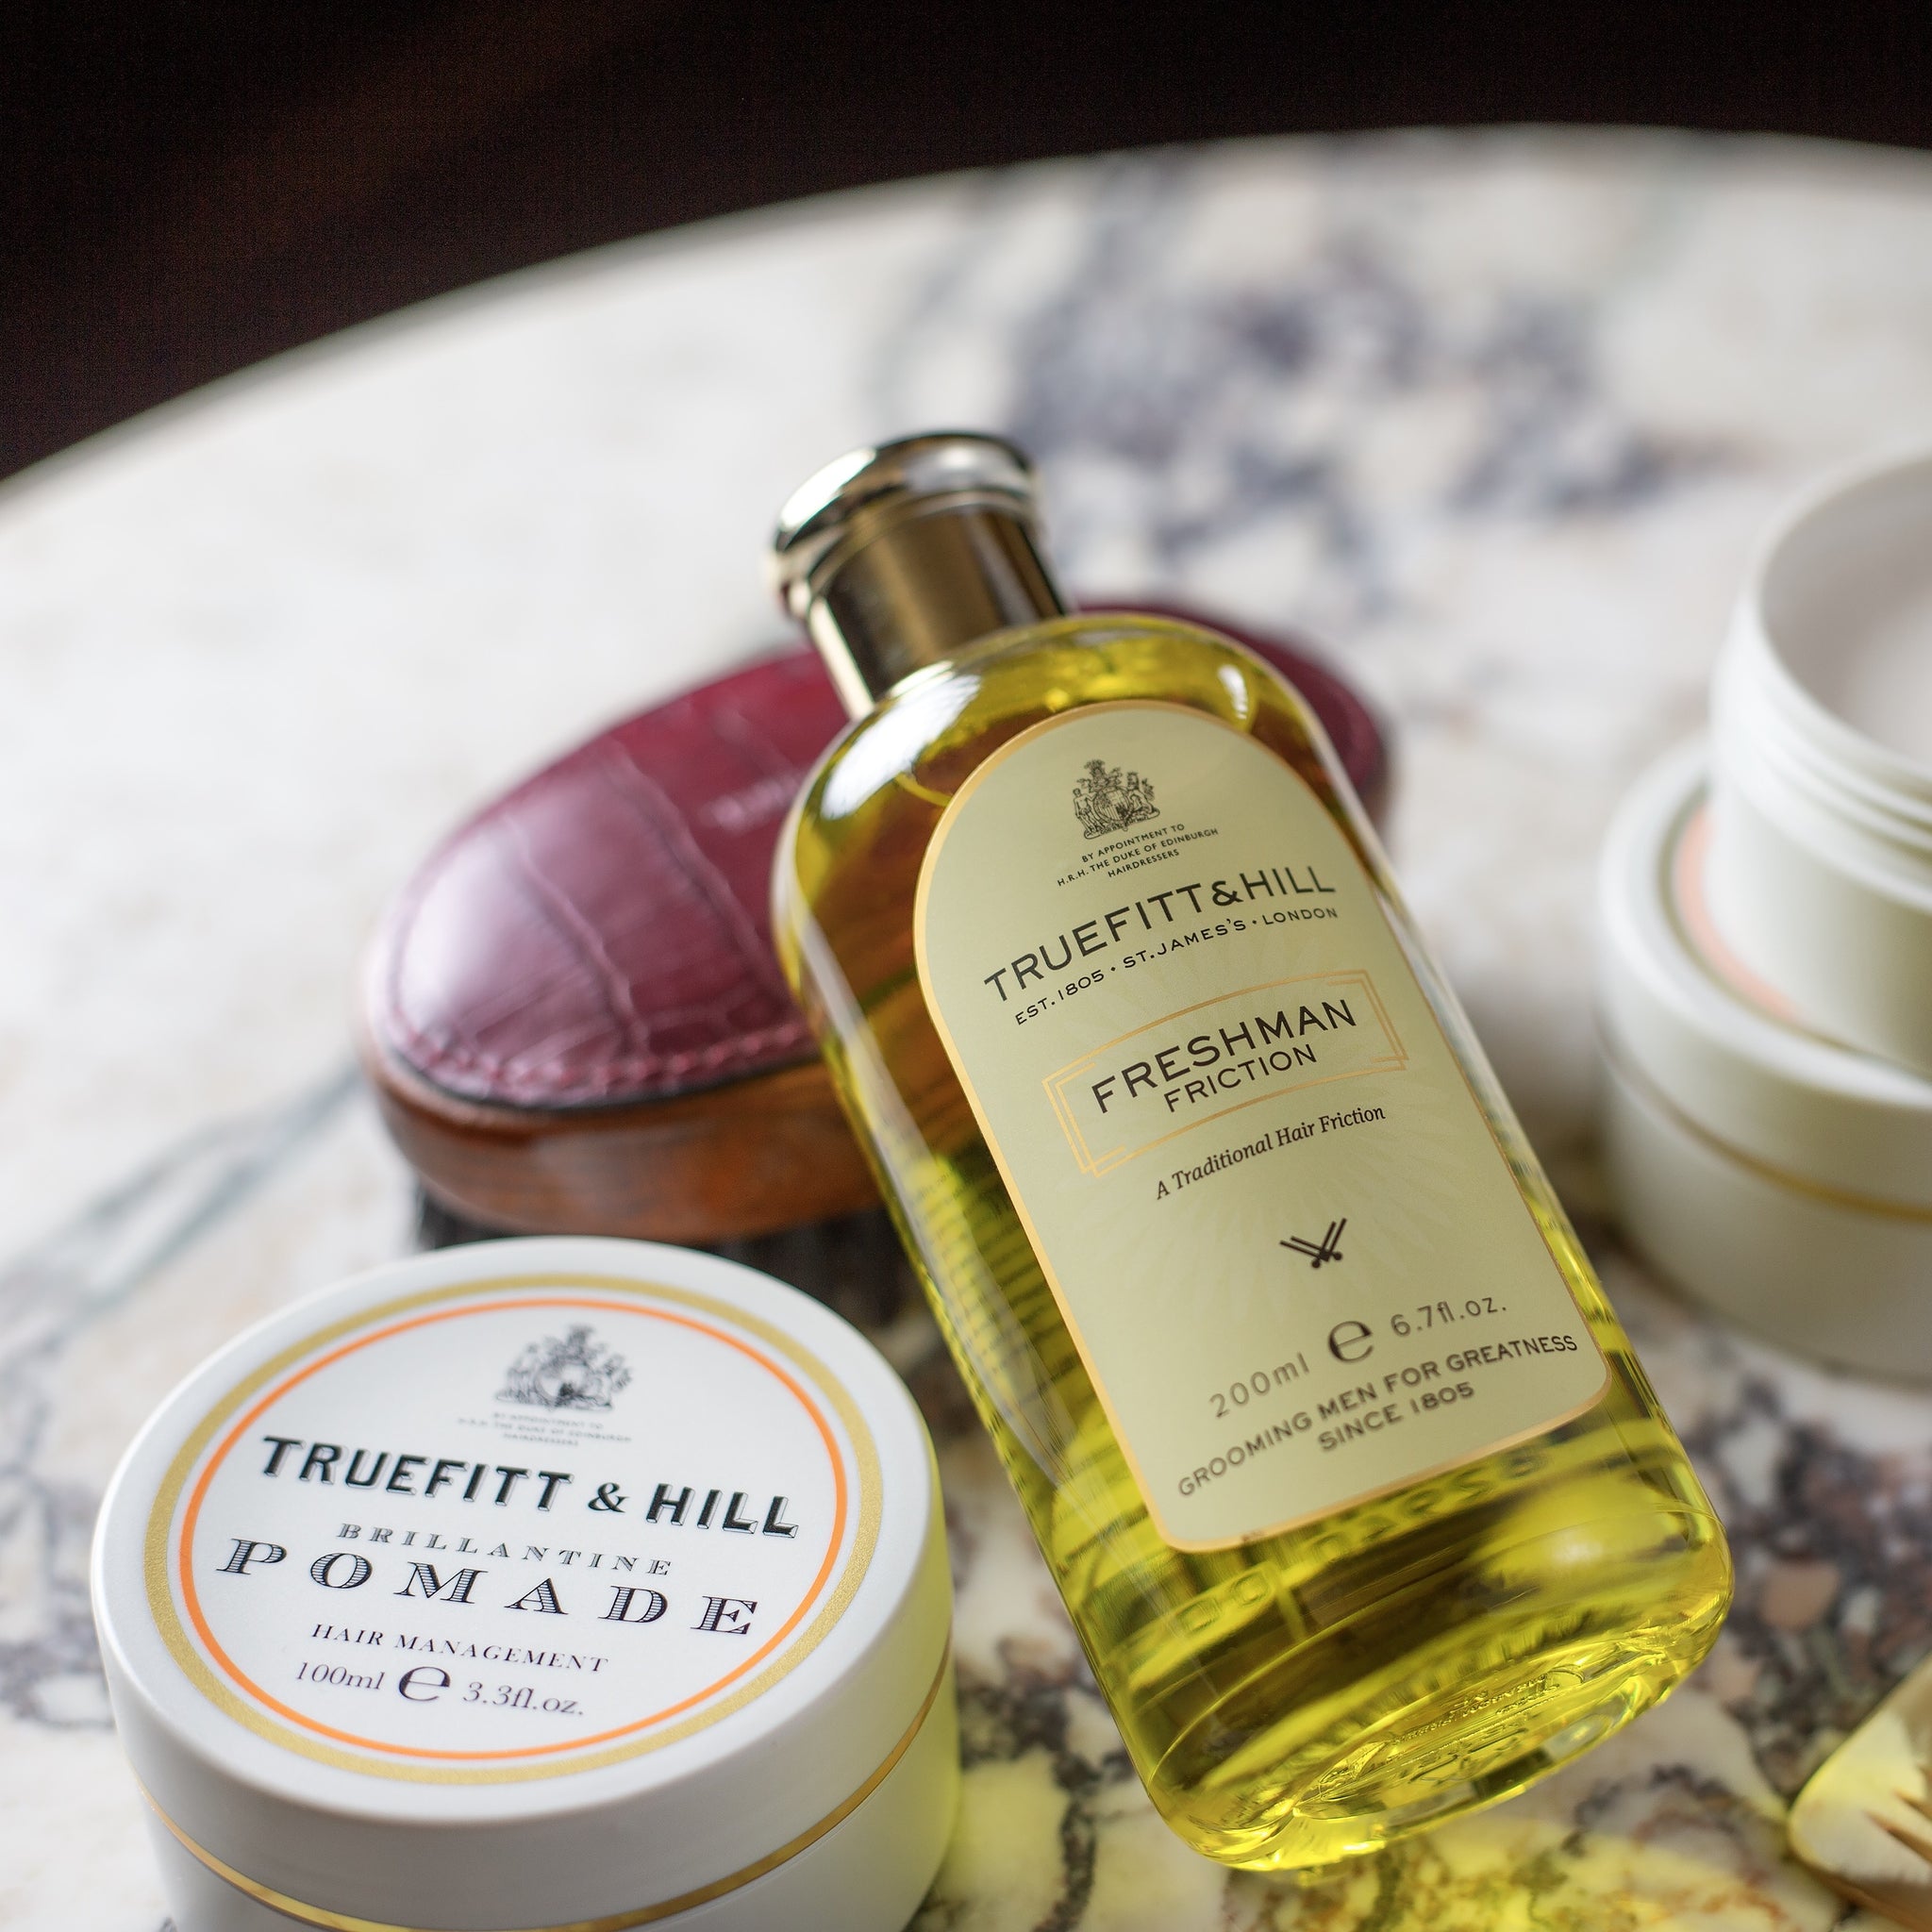 Truefitt & Hill US, Gentlemen's Grooming and Styling Products